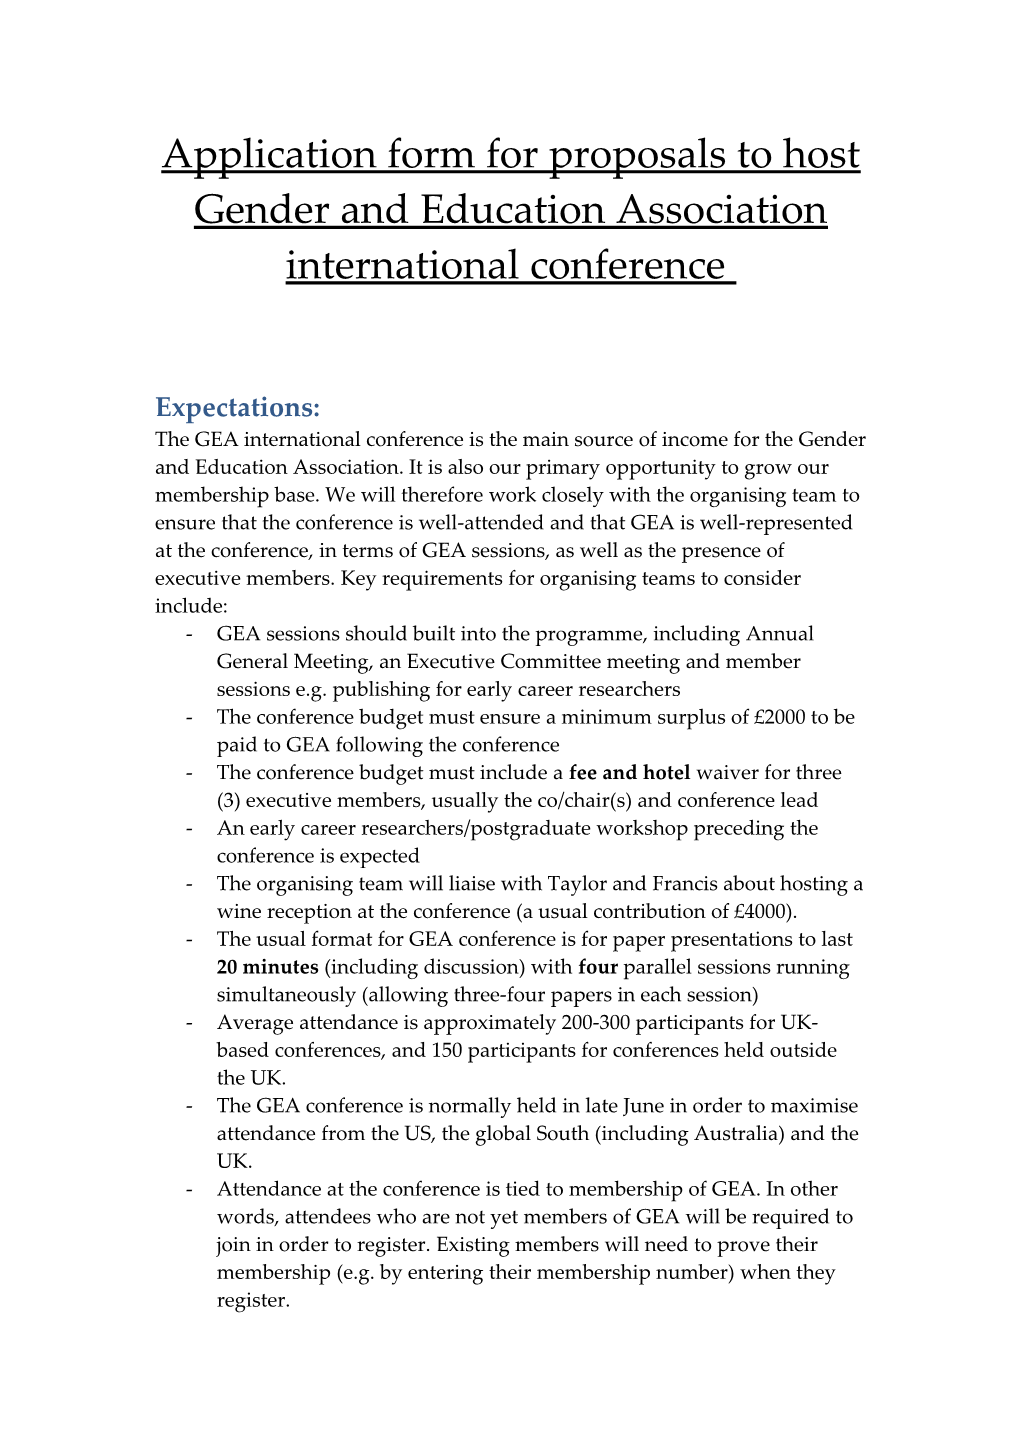 Application Form for Proposals to Host Gender and Education Association International Conference